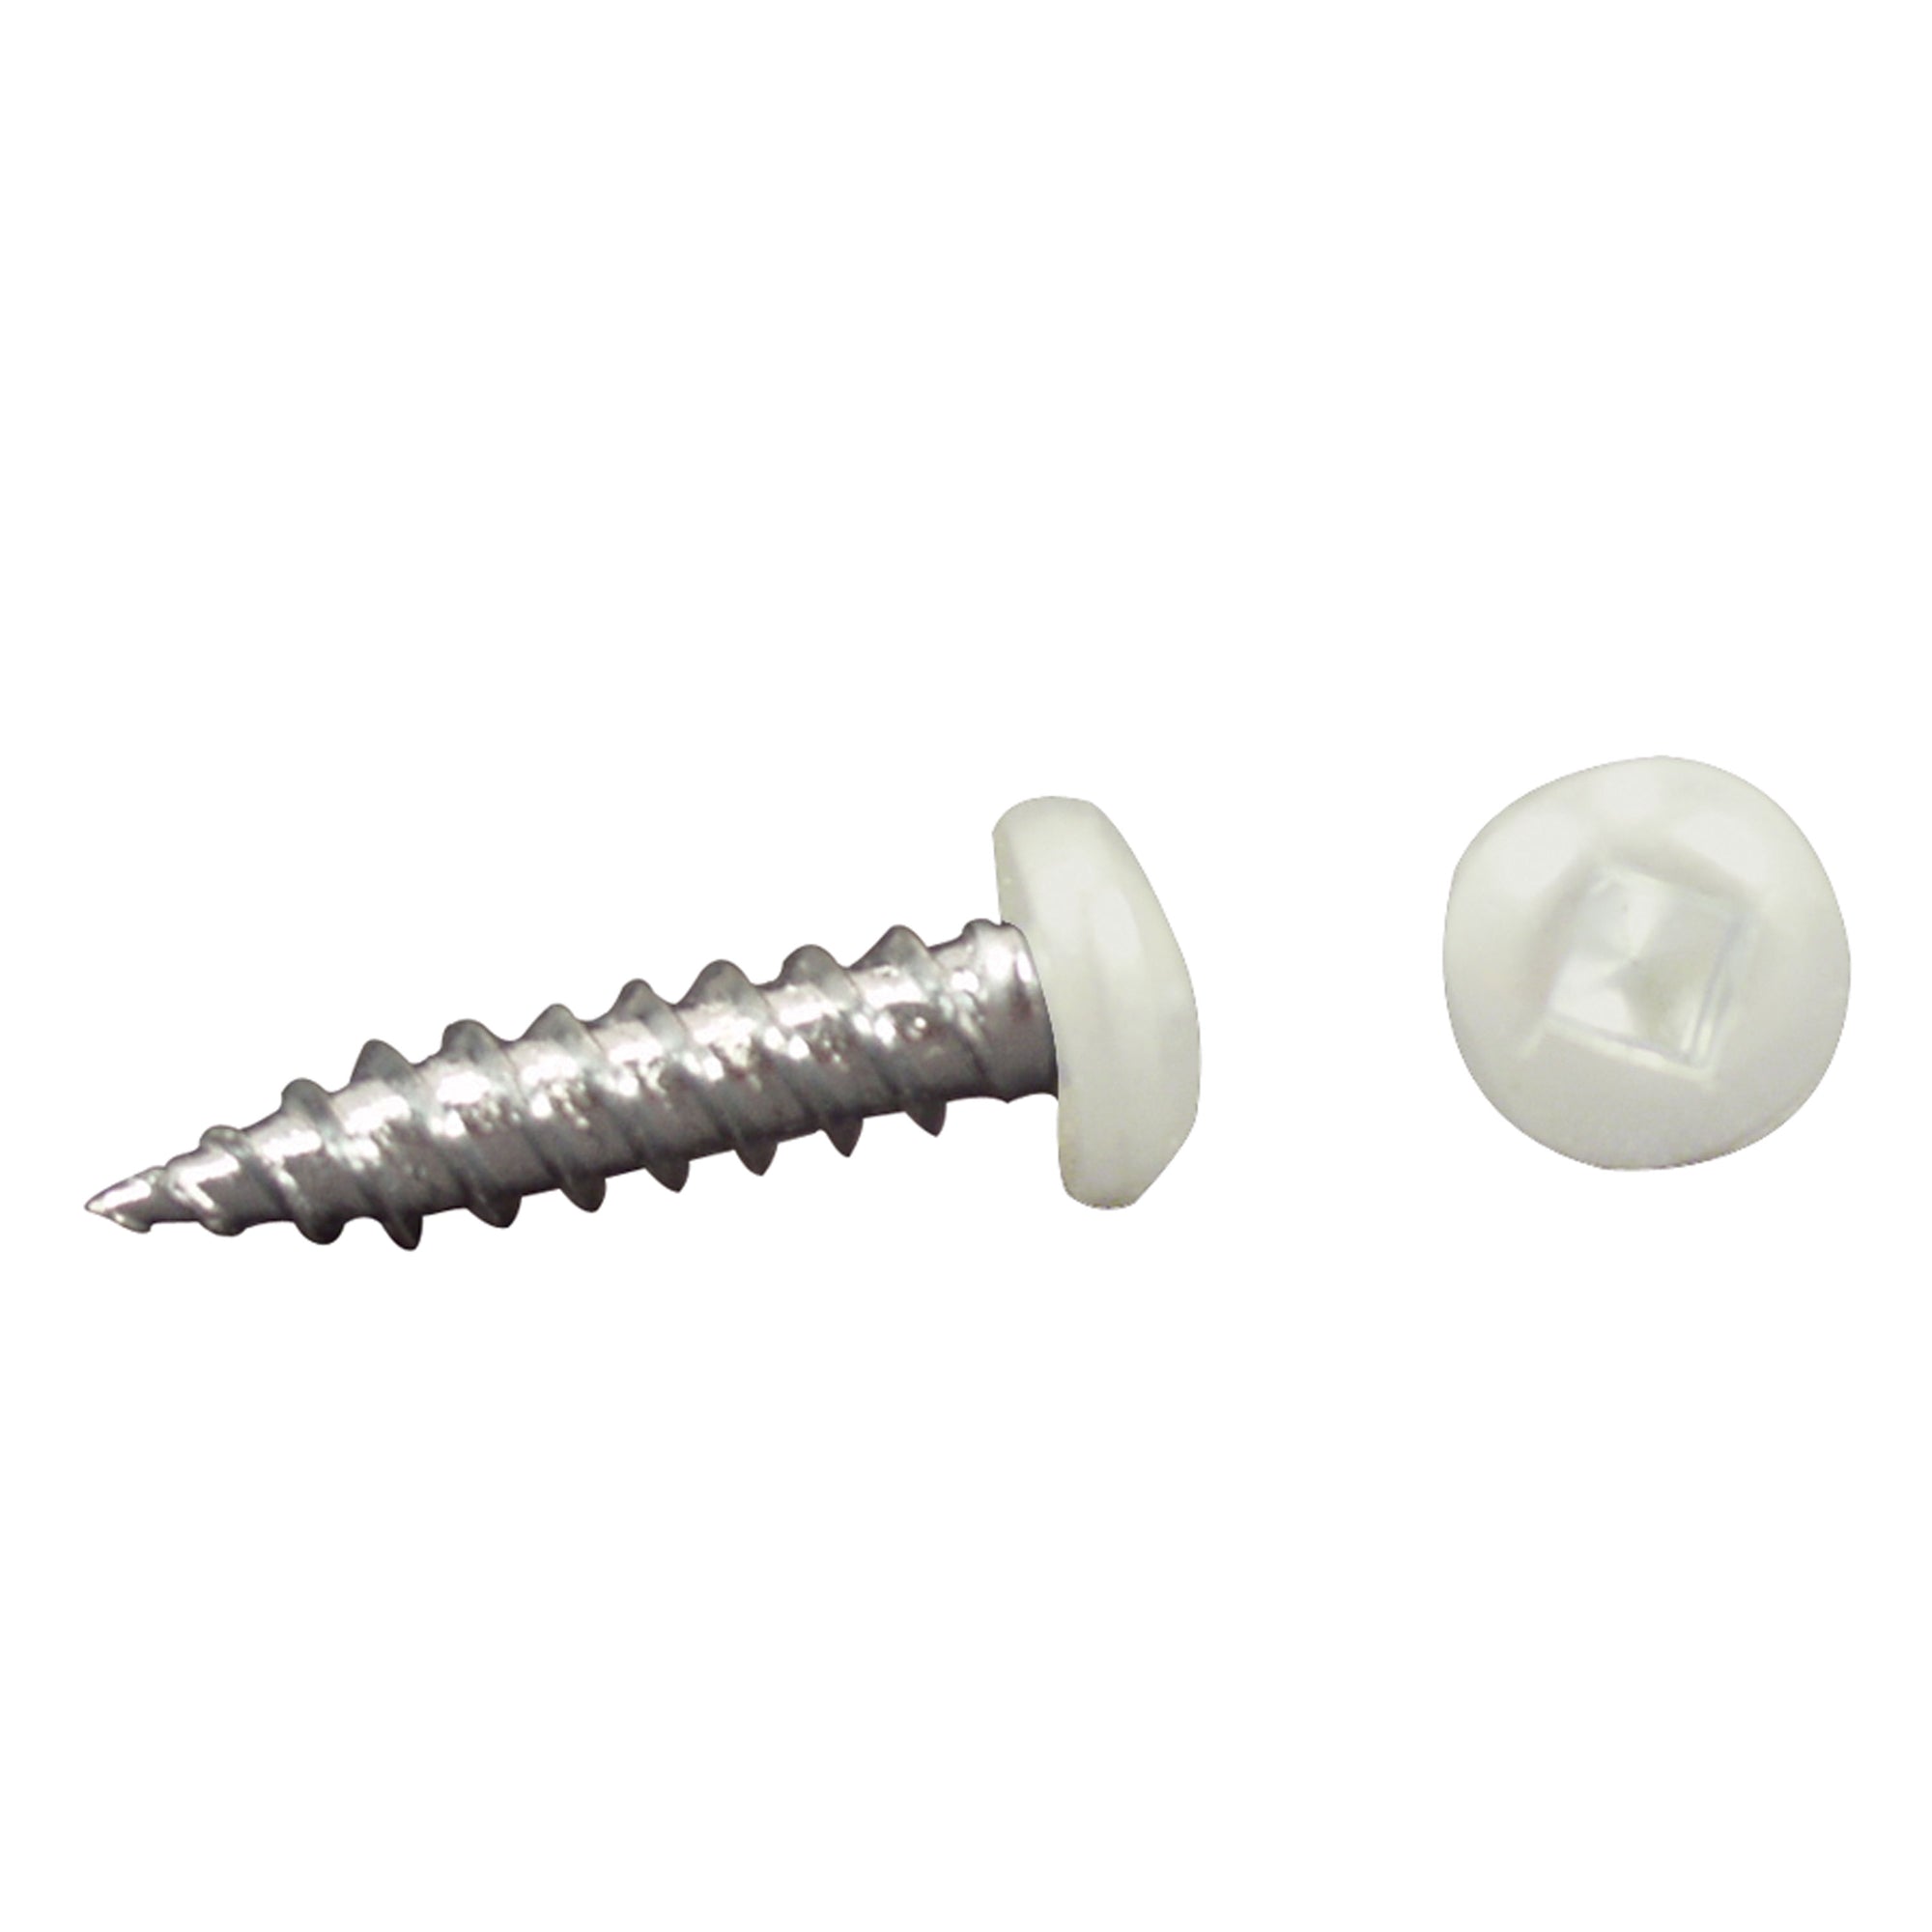 AP Products 012-PSQ50 W 8 X 1- 1/4 Pan Head Square Recess Screw, Pack of 50 - 1-1/4", White